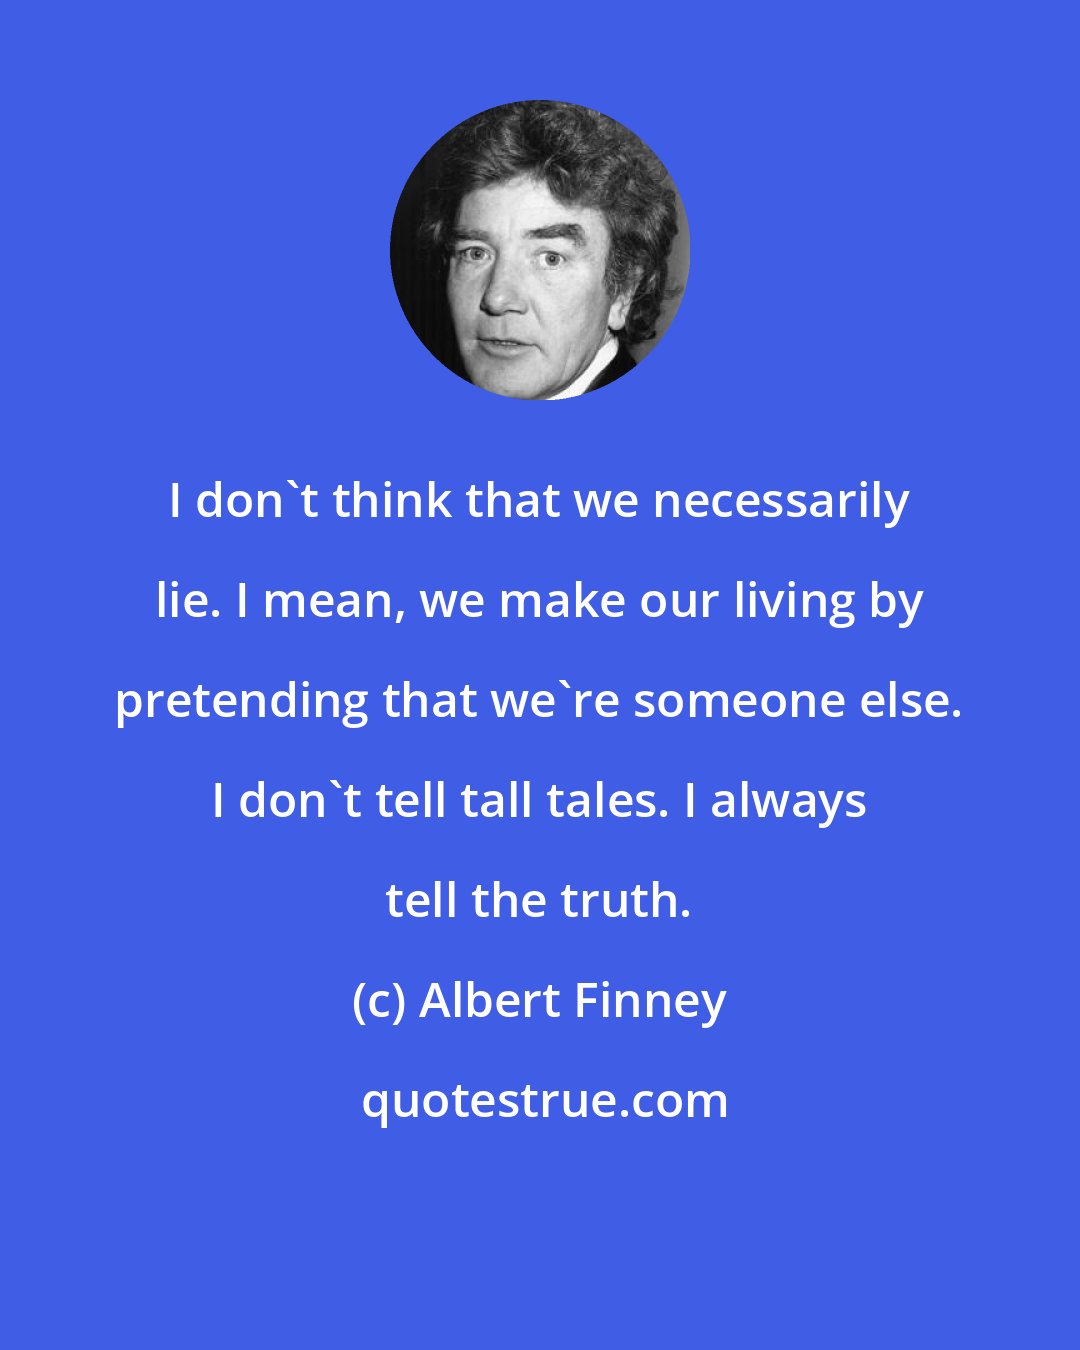 Albert Finney: I don't think that we necessarily lie. I mean, we make our living by pretending that we're someone else. I don't tell tall tales. I always tell the truth.